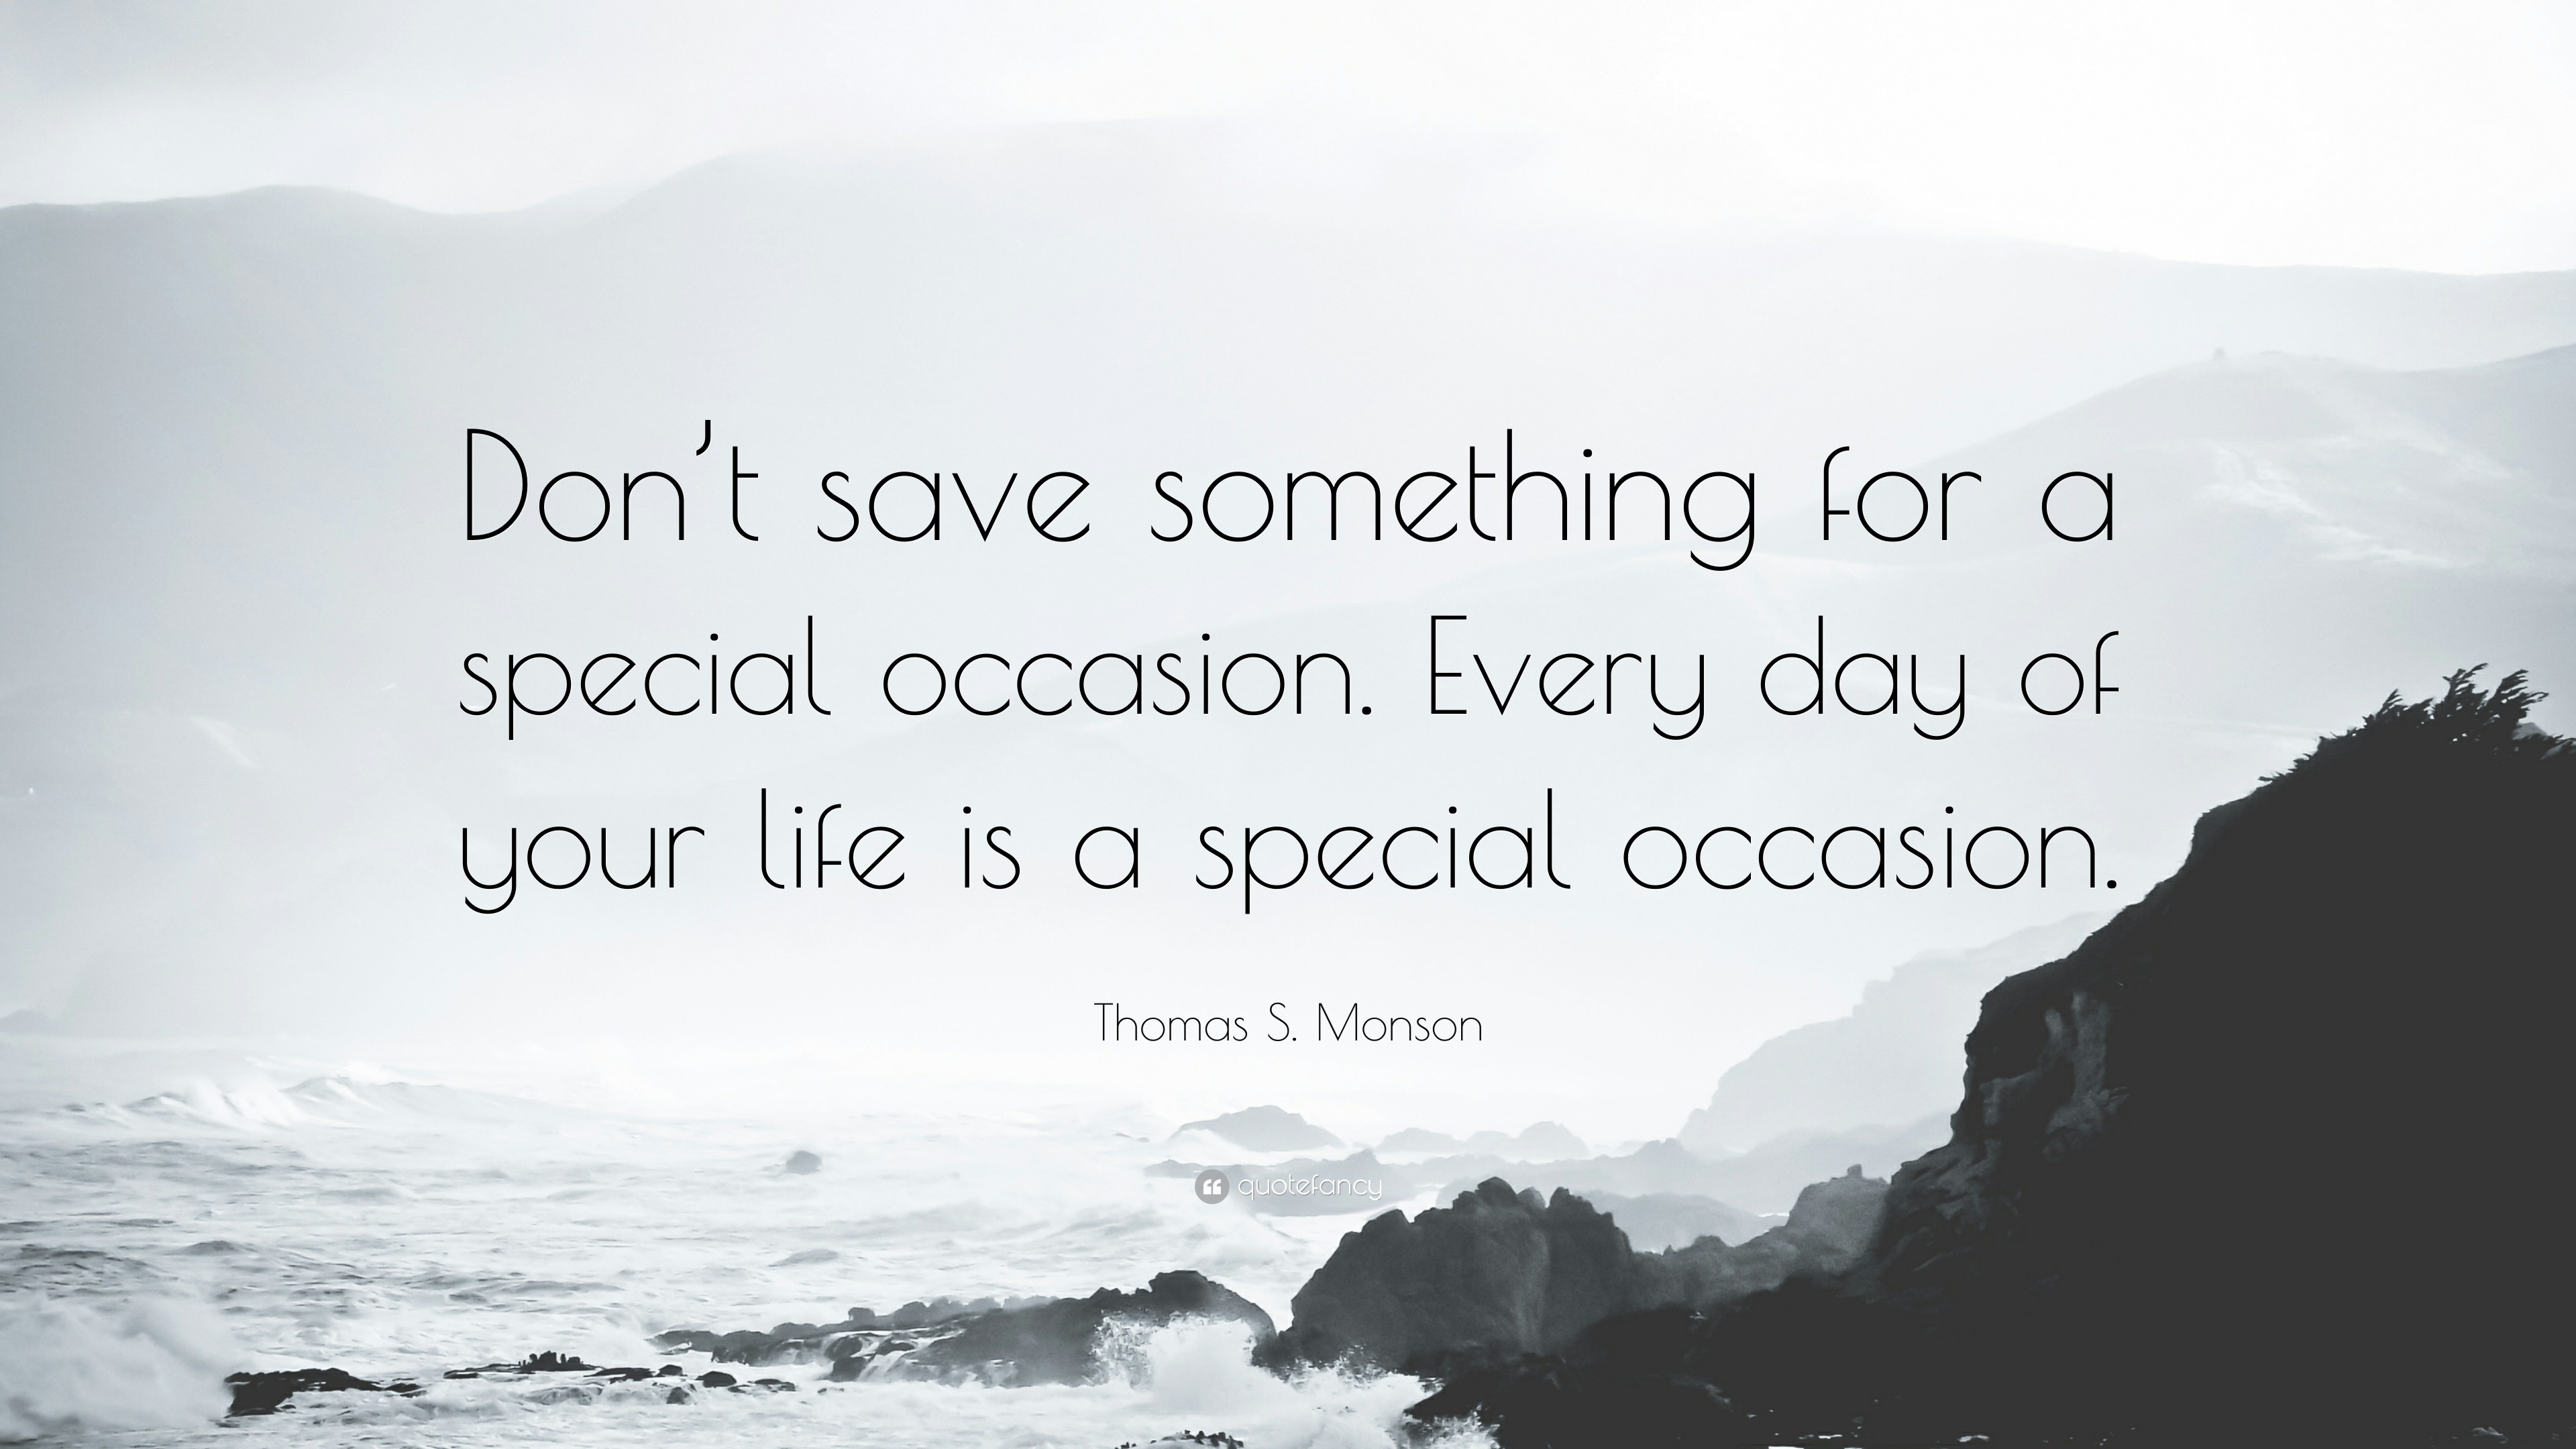 Thomas S. Monson Quote: “Don't save something for a special occasion. Every  day of your